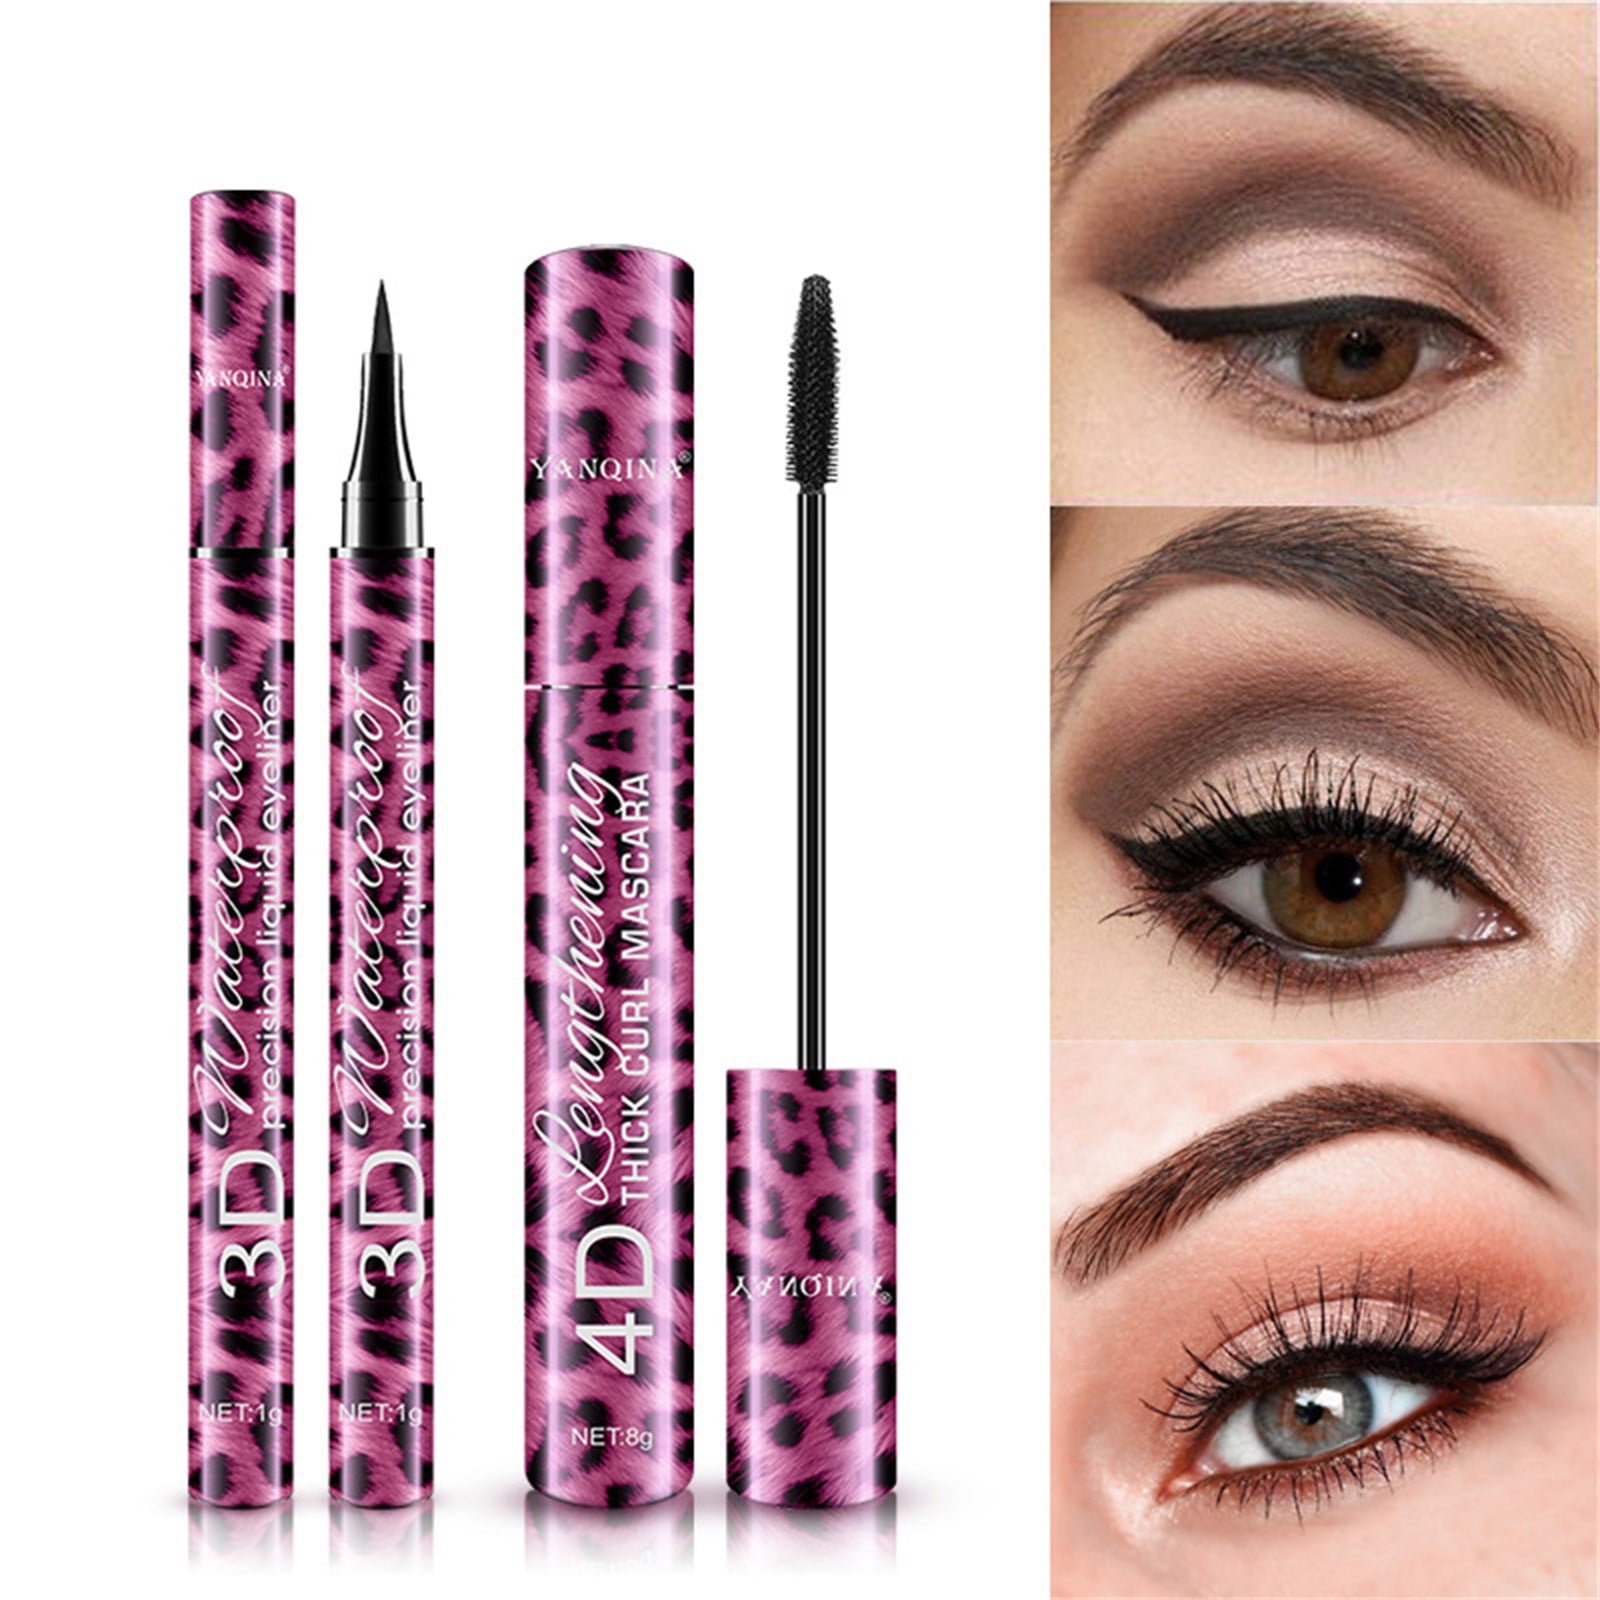 RIN: Beauty Made Halal - Make Over Lip Amplify Contour Liner